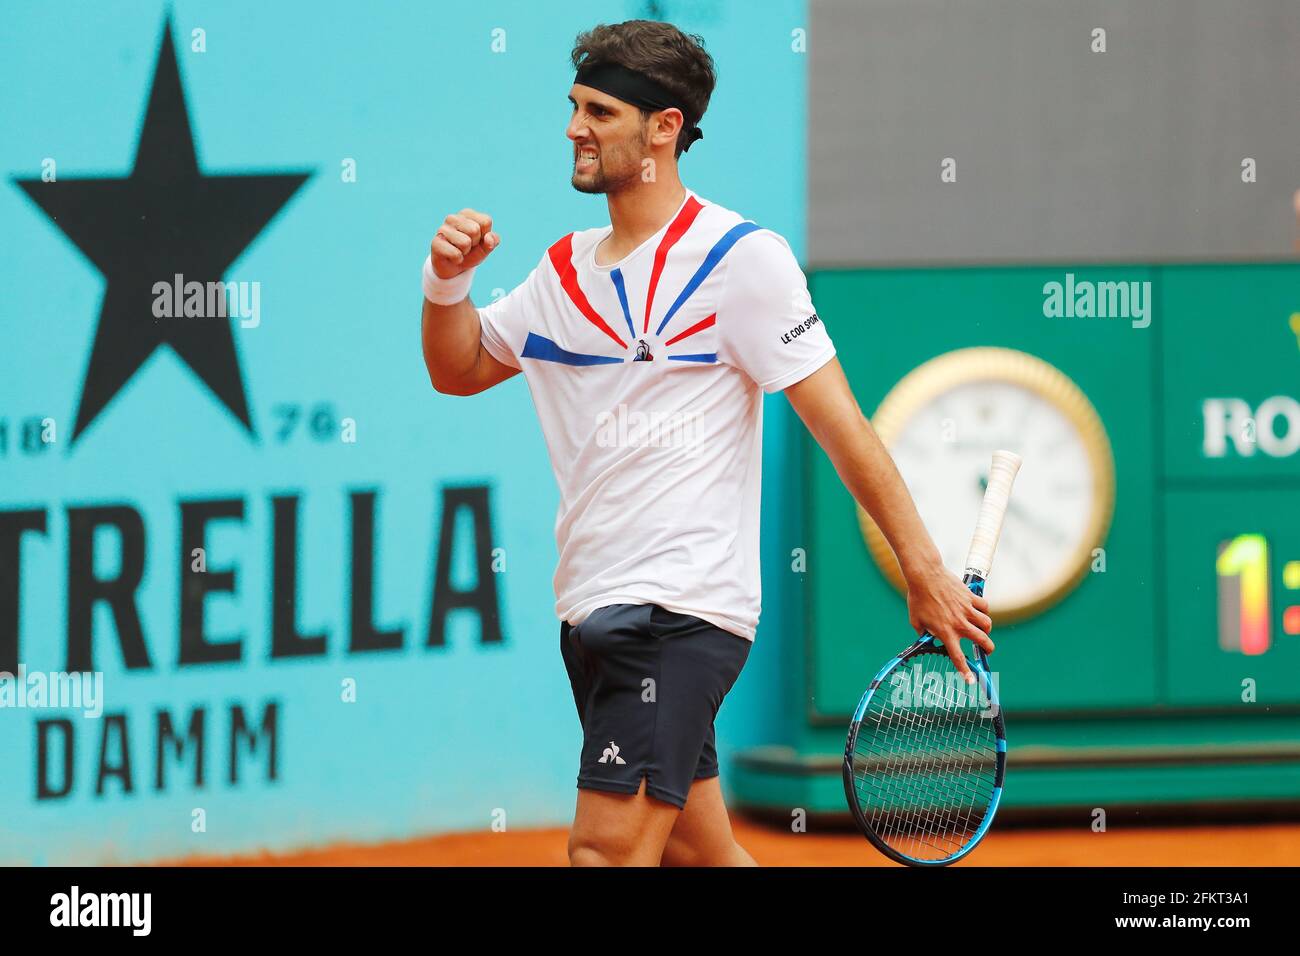 Madrid, Spain. 3rd May, 2021. Carlos Taberner (ESP) Tennis : Carlos  Taberner of Spain celebrate after point during singles 1st round match  against Fabio Fognini of Italy on the ATP Masters 1000 "